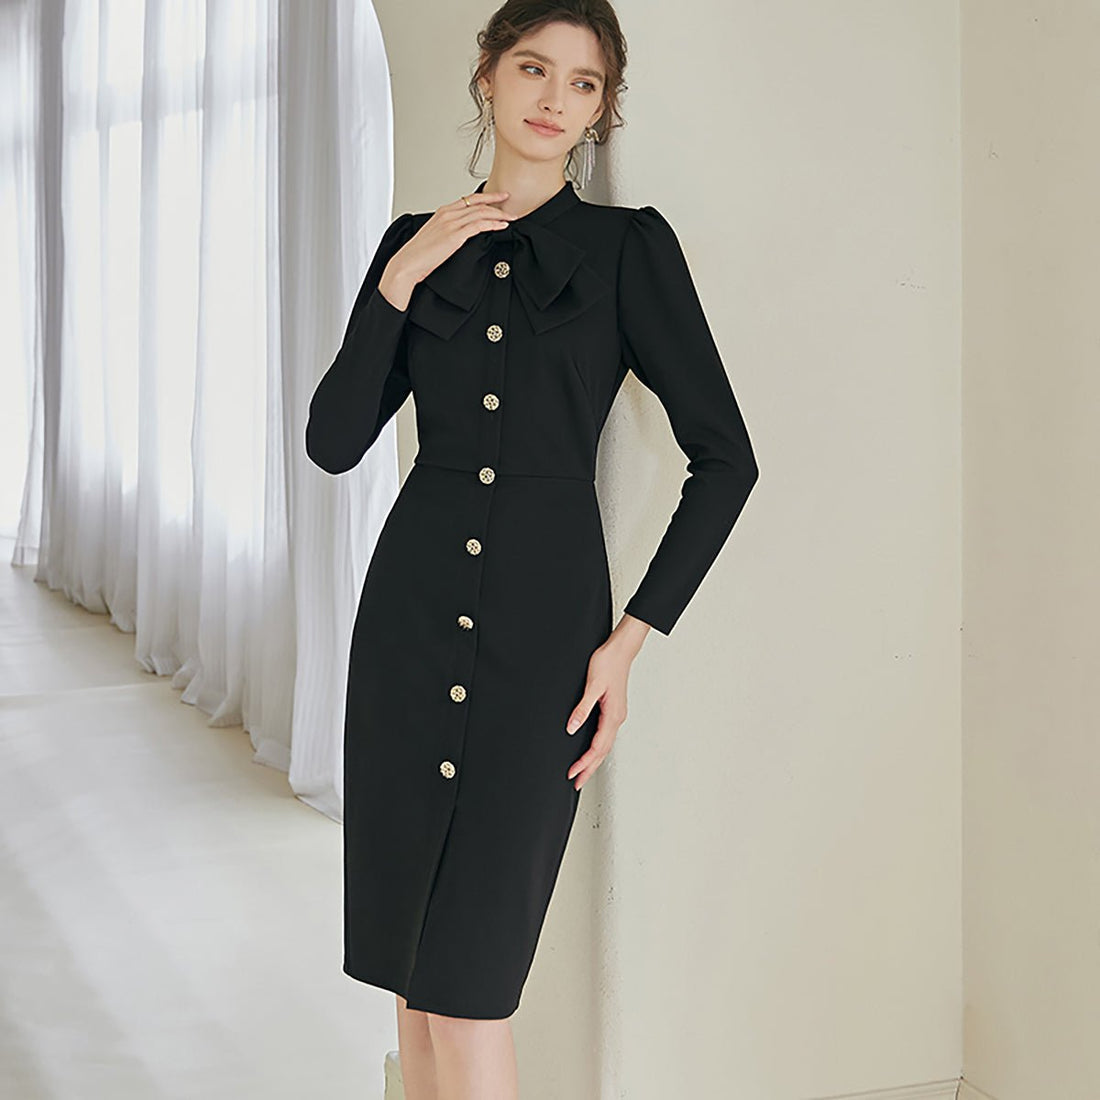 Classic Black Bodycon Dress with Golden Buttons - 0cm